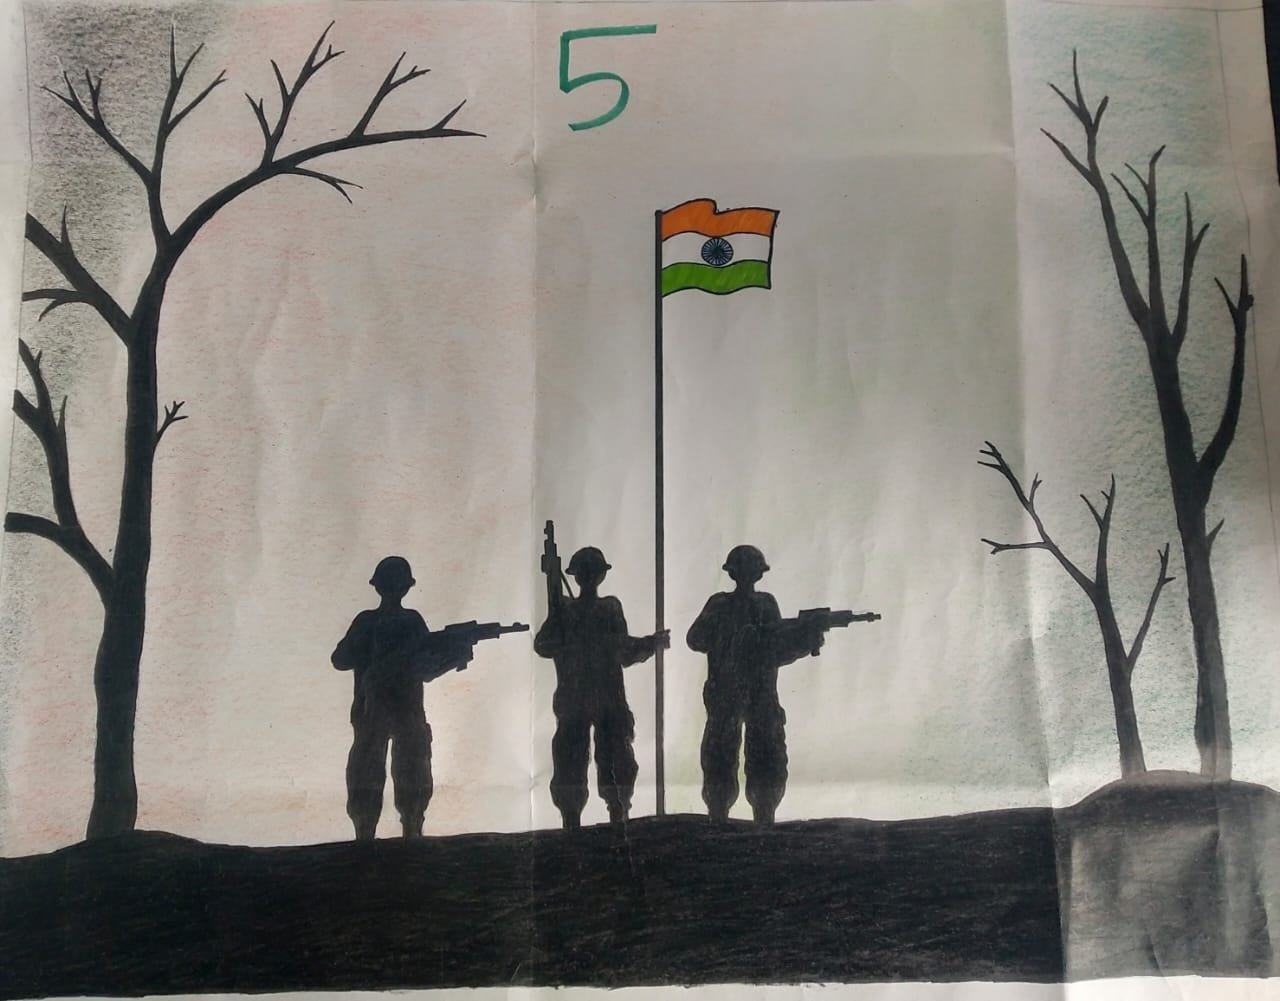 Indian Army organises painting competition for children in Kashmir valley's  border areas - India Today